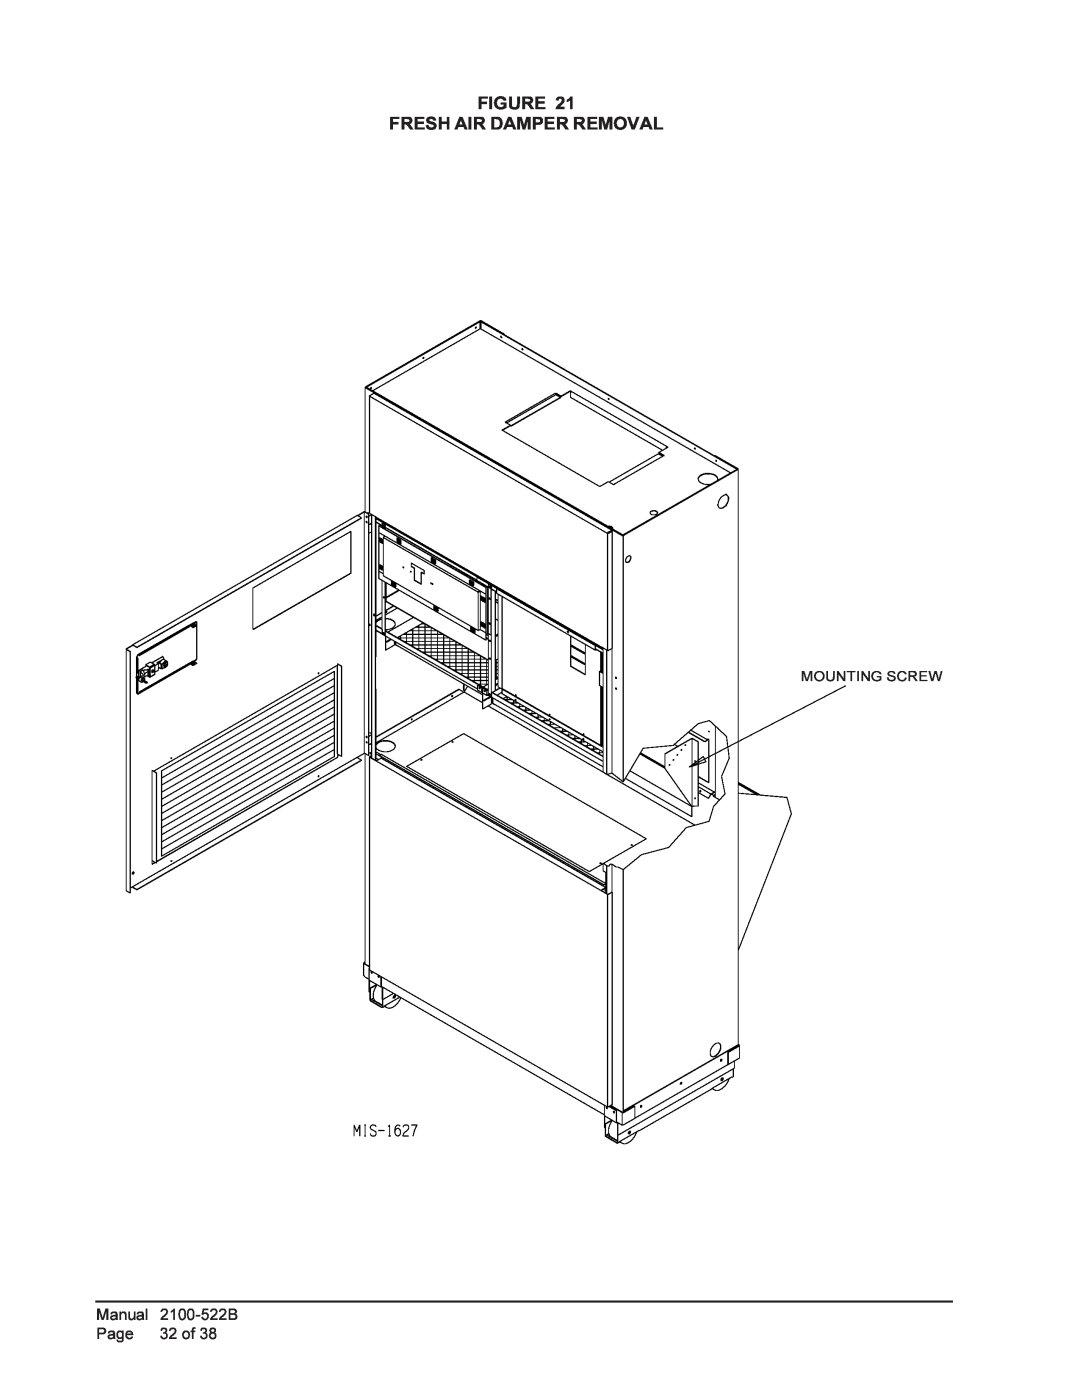 Bard Q42A1, Q30A1, Q36A1, Q60A1, Q24A1, Q48A1 installation instructions Figure Fresh Air Damper Removal, Manual, Page, 32 of 